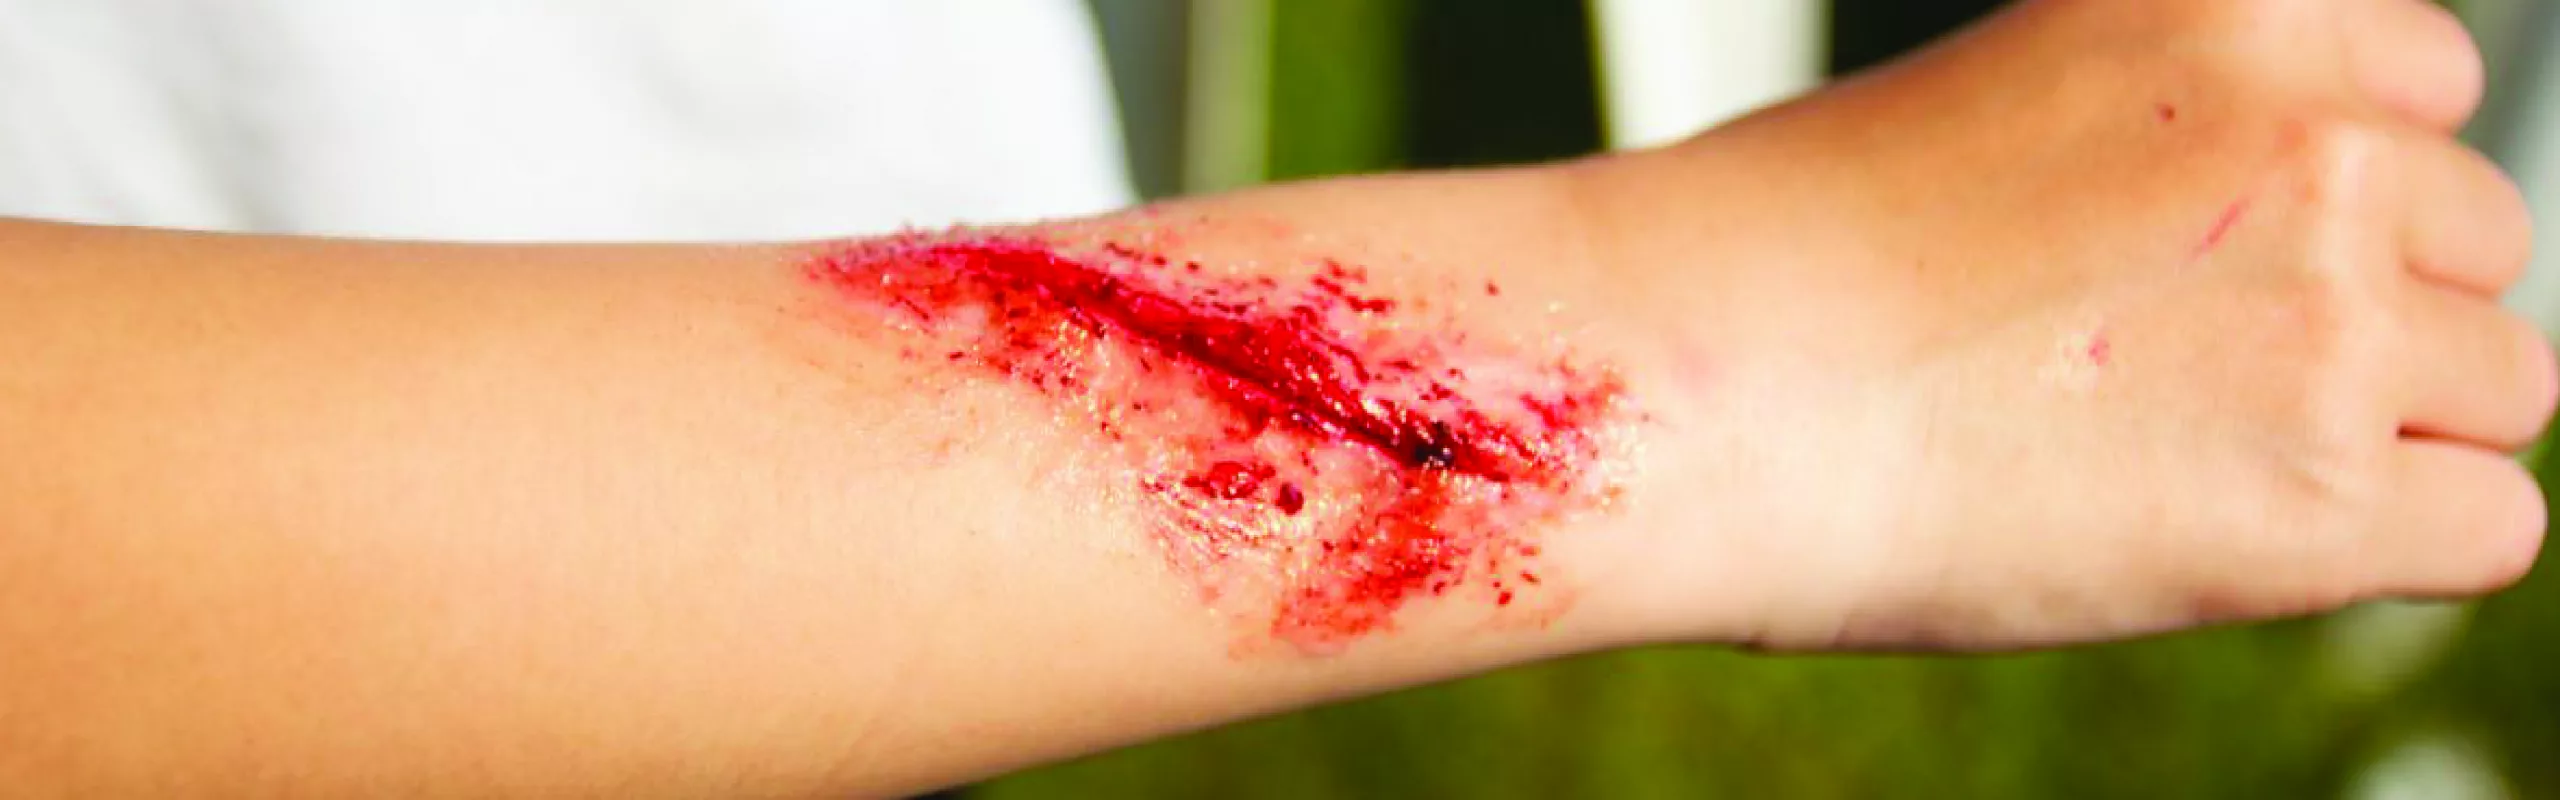 First Aid Tips for Wound Care When Injured